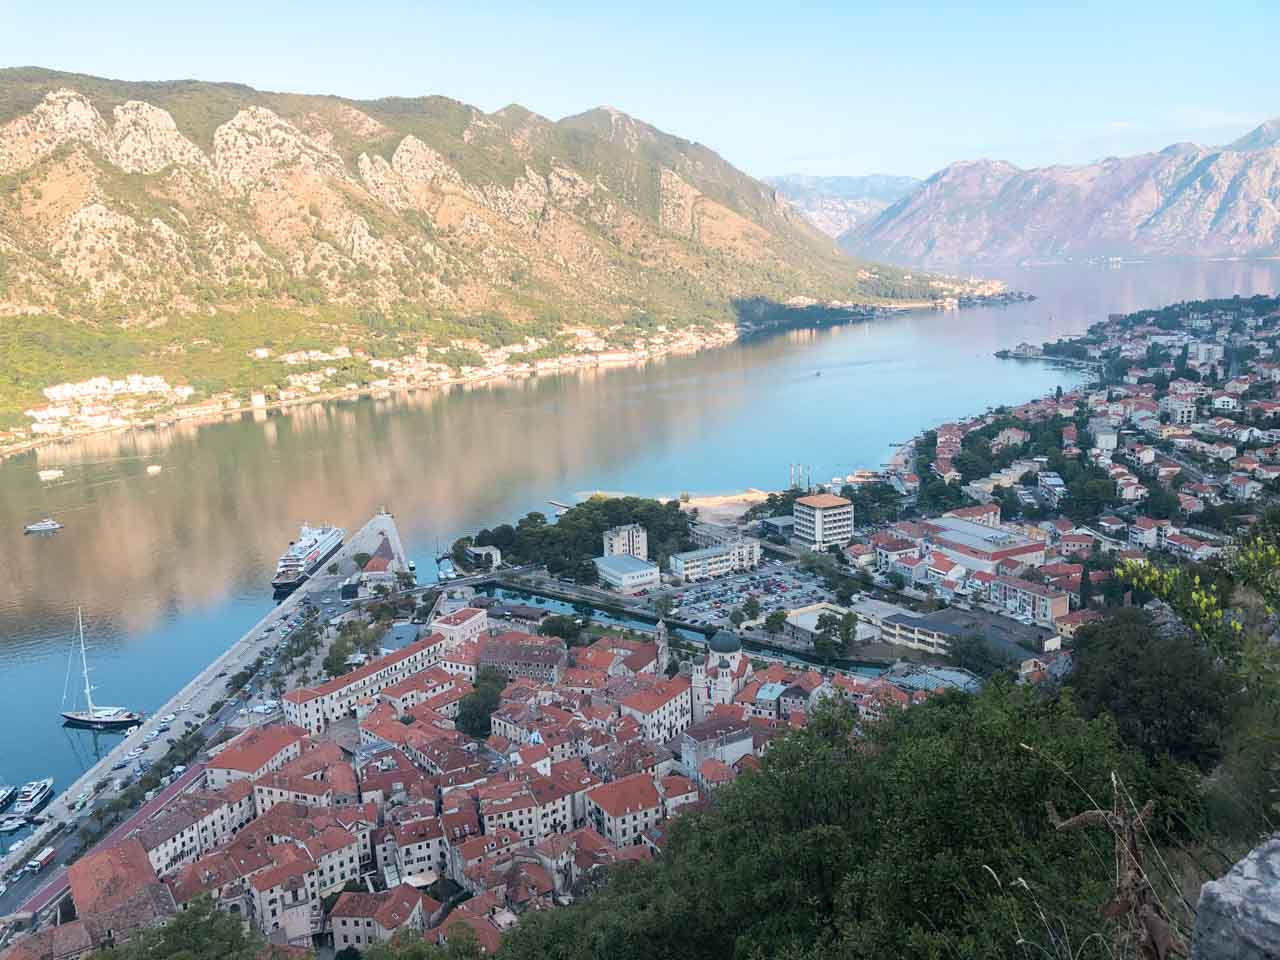 Kotor Bay seen from the top of the Kotor City Walls